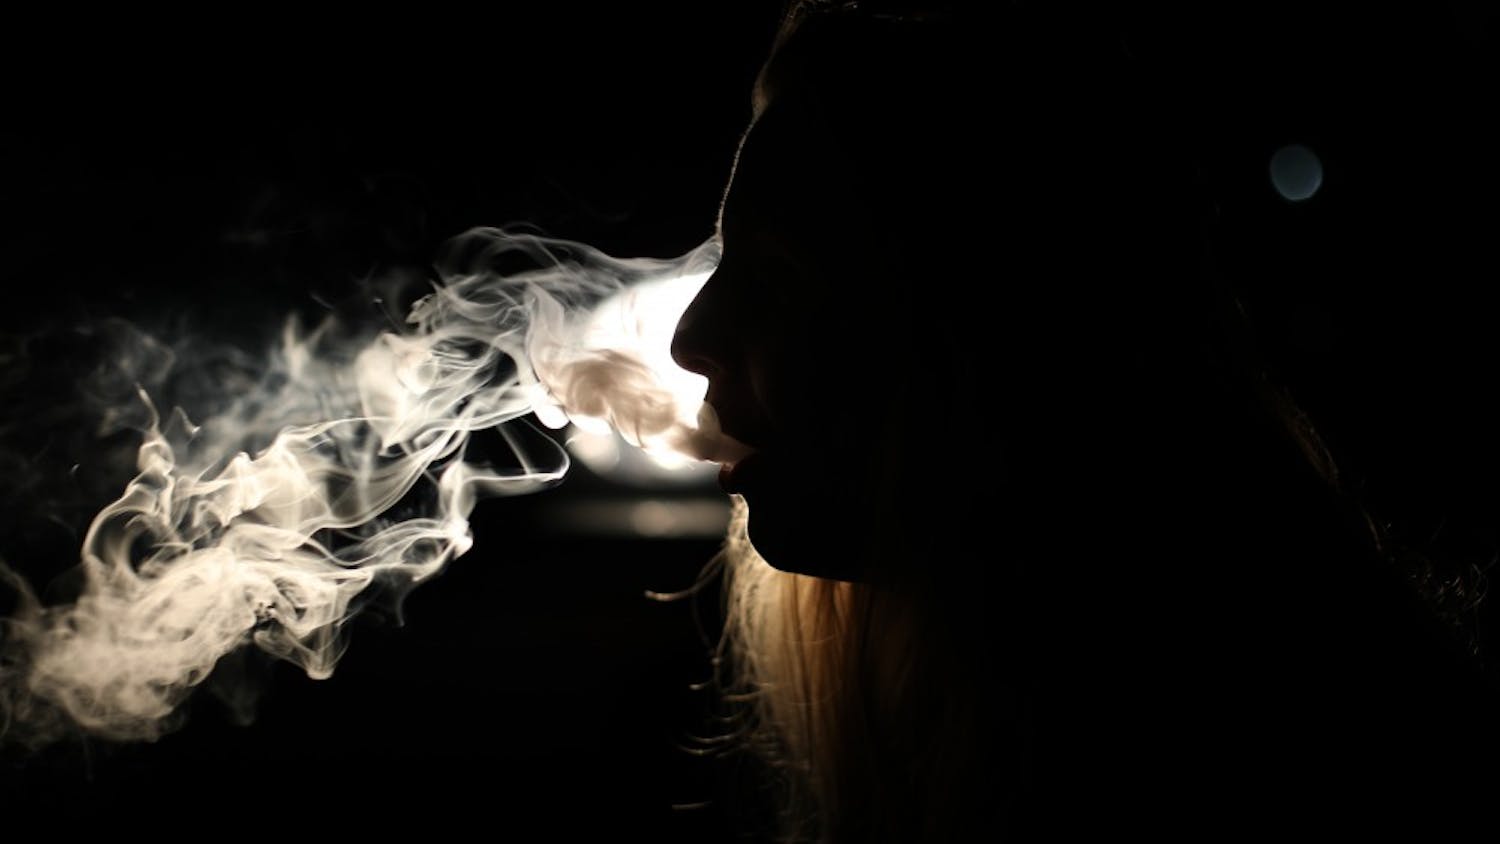 Photo Illustration. Although traditional cigarette use has fallen in the past decade among young people in North Carolina, the rise in popularity of e-cigarettes has presented a new challenge for health officials.&nbsp;